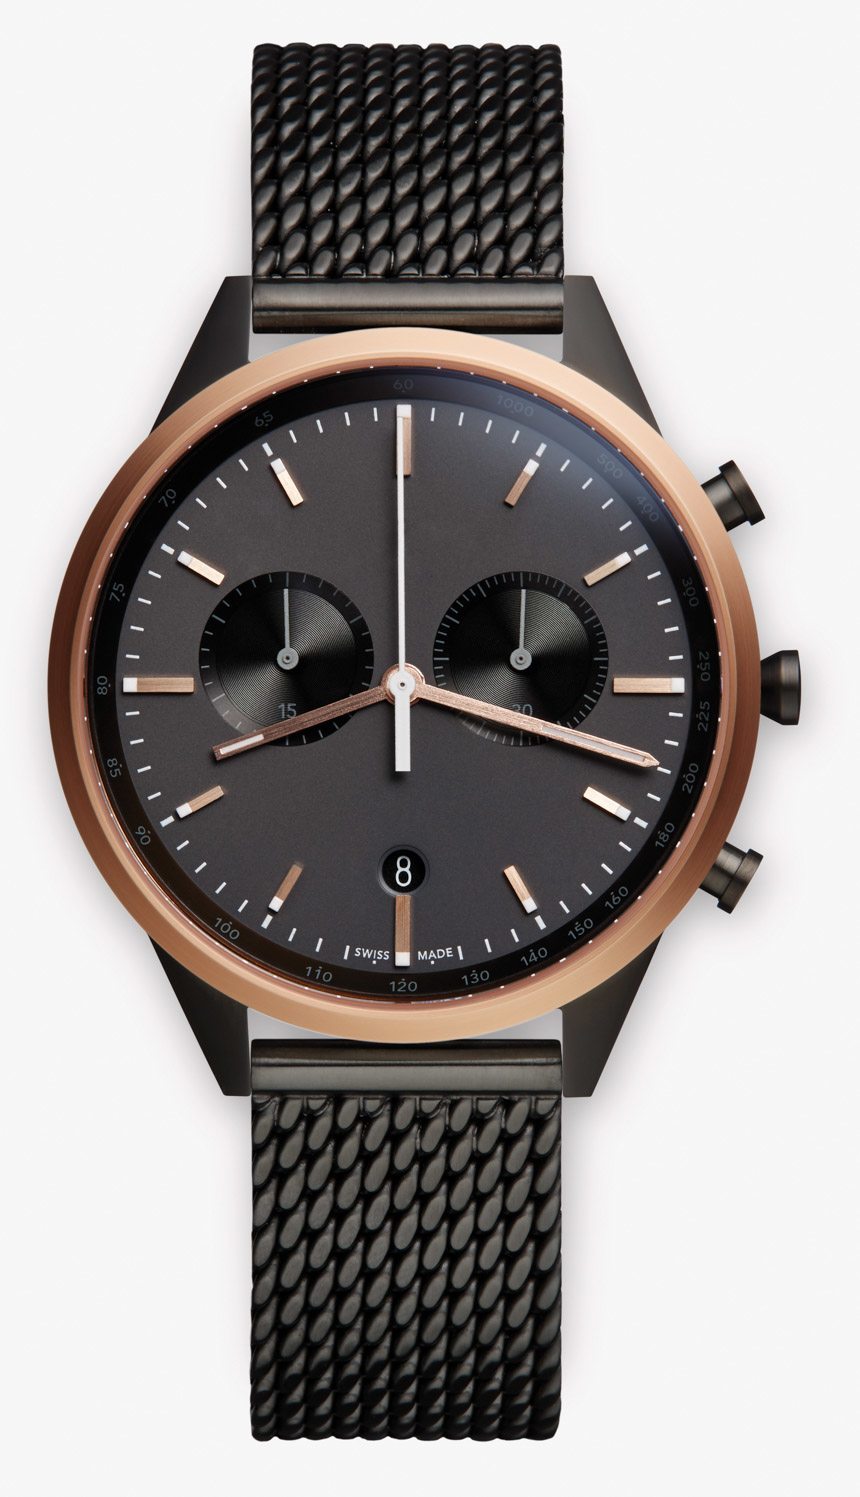 Uniform Wares C41 Chronograph Headlines New Swiss Made Watch Collection Watch Releases 